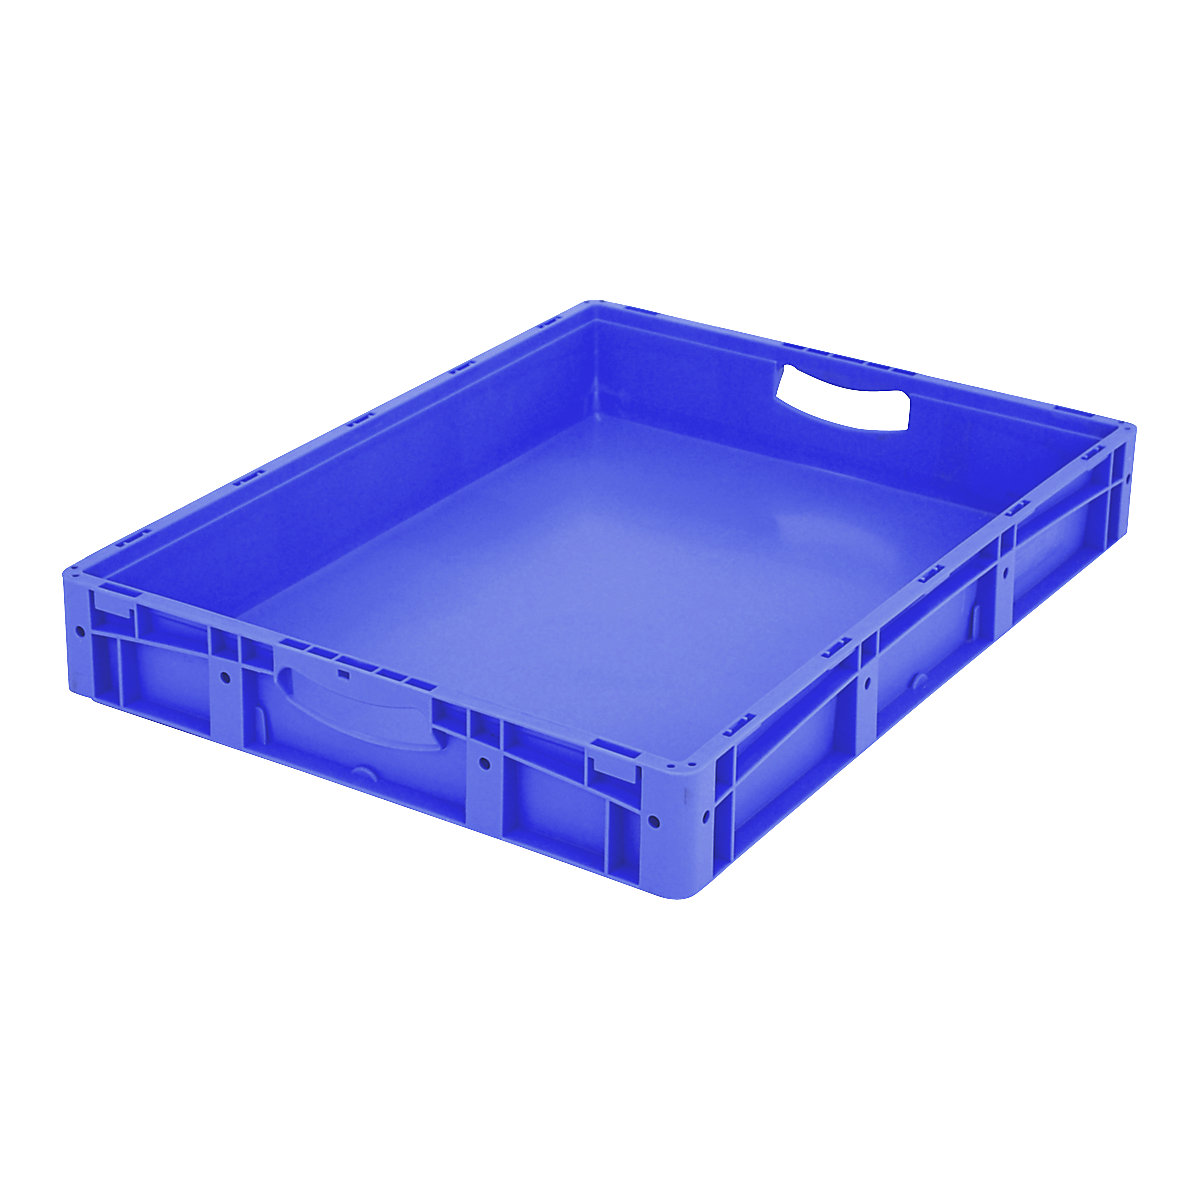 XL Euro stacking container – BITO, standard model, LxWxH 800 x 600 x 120 mm-4